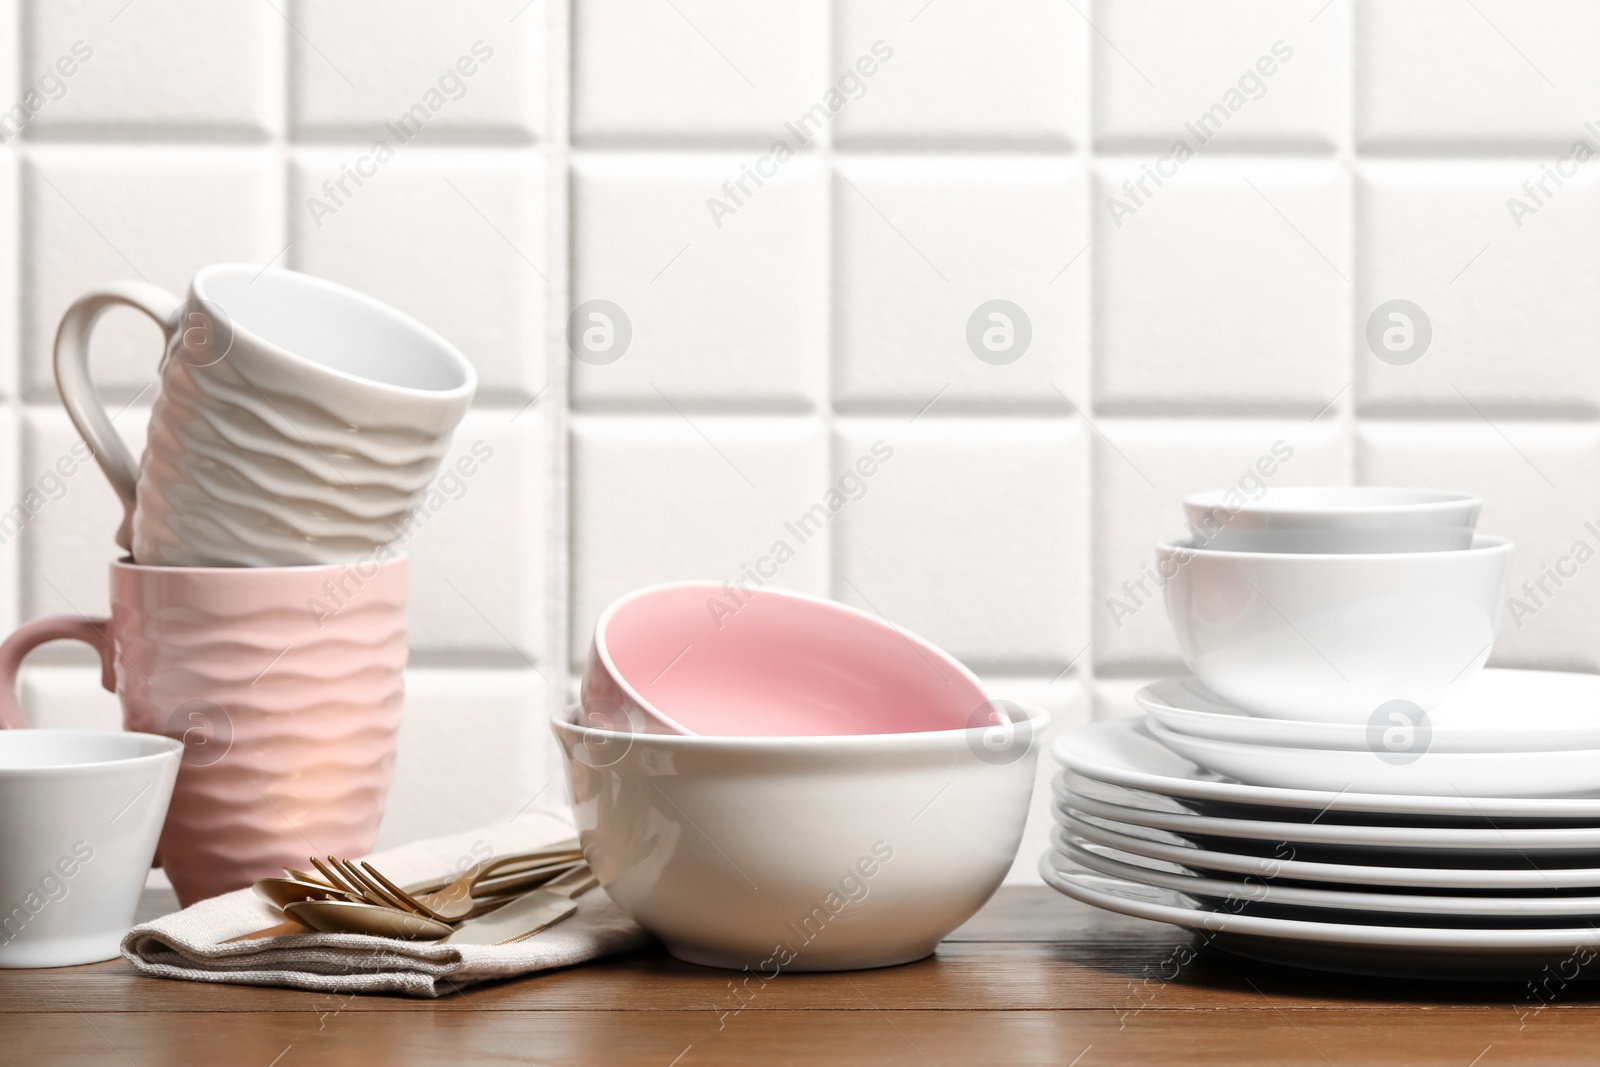 Photo of Beautiful ceramic dishware, cups and cutlery on wooden table